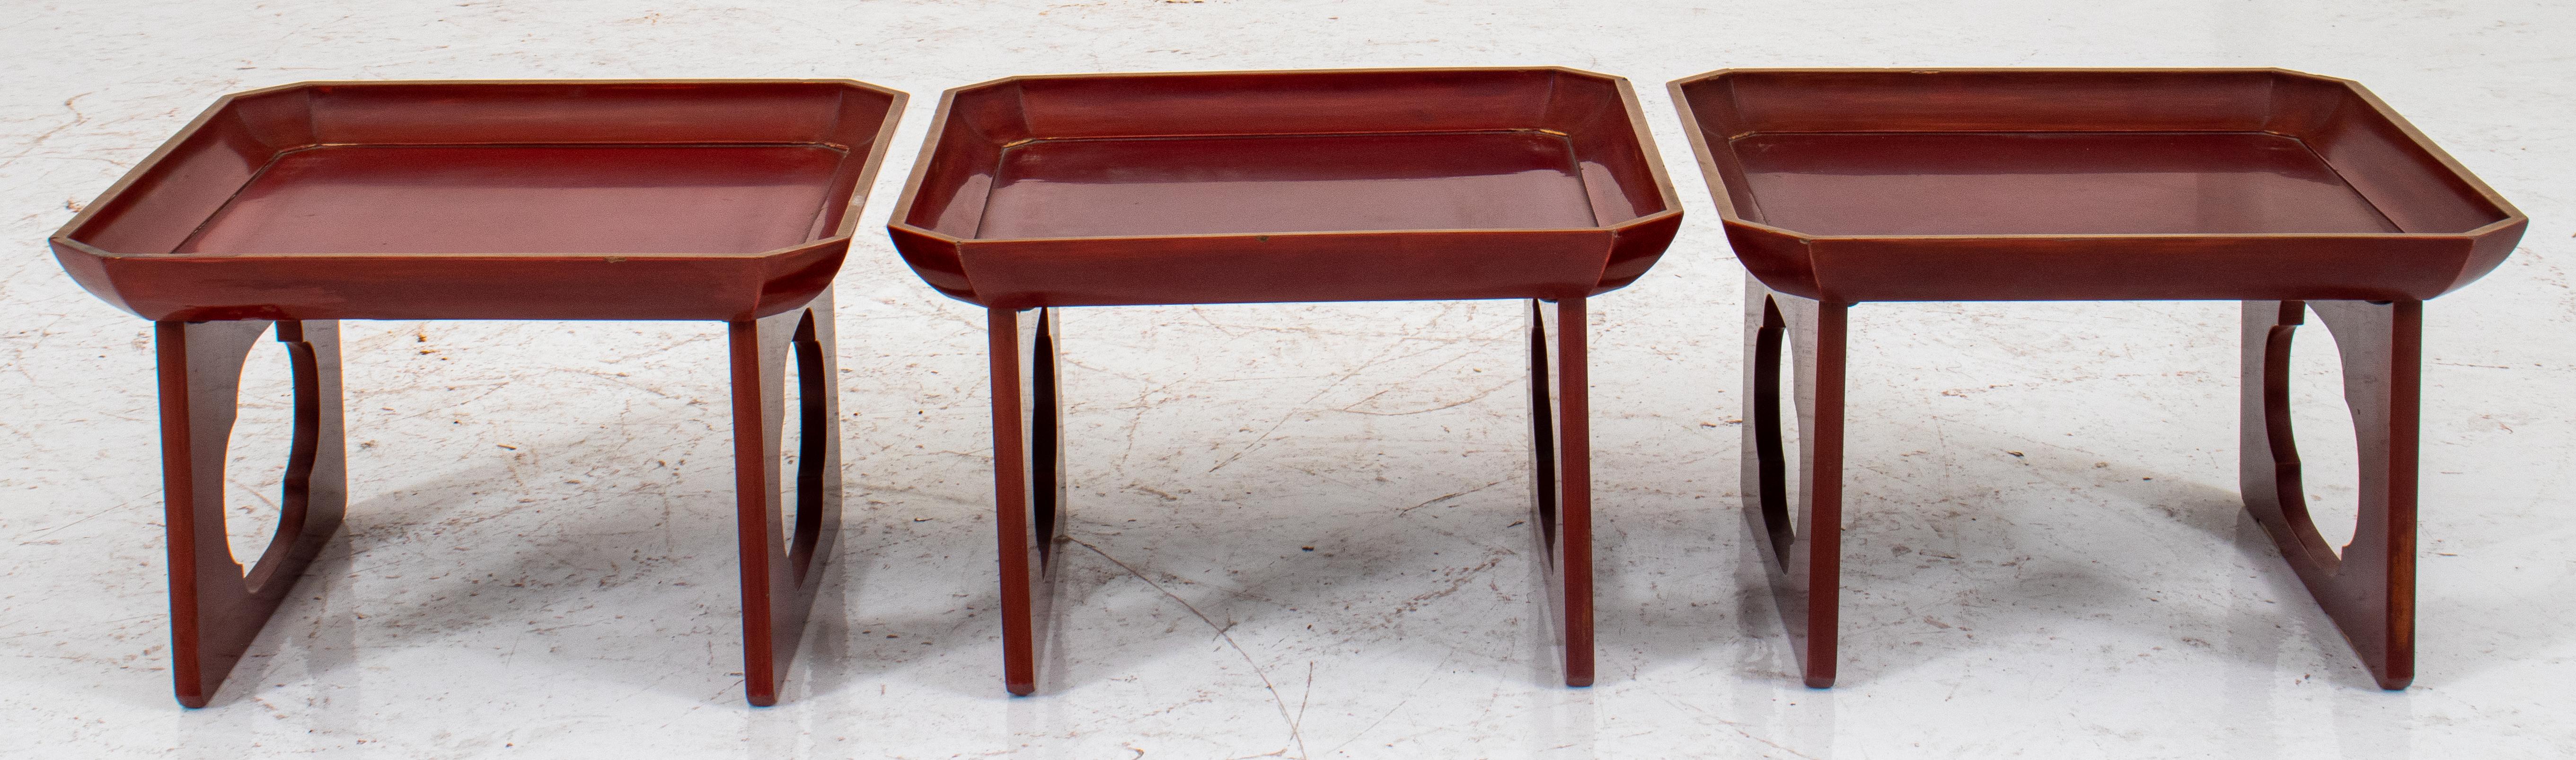 Chinese Copper Red Lacquer Stacking Tables, 3 For Sale 1